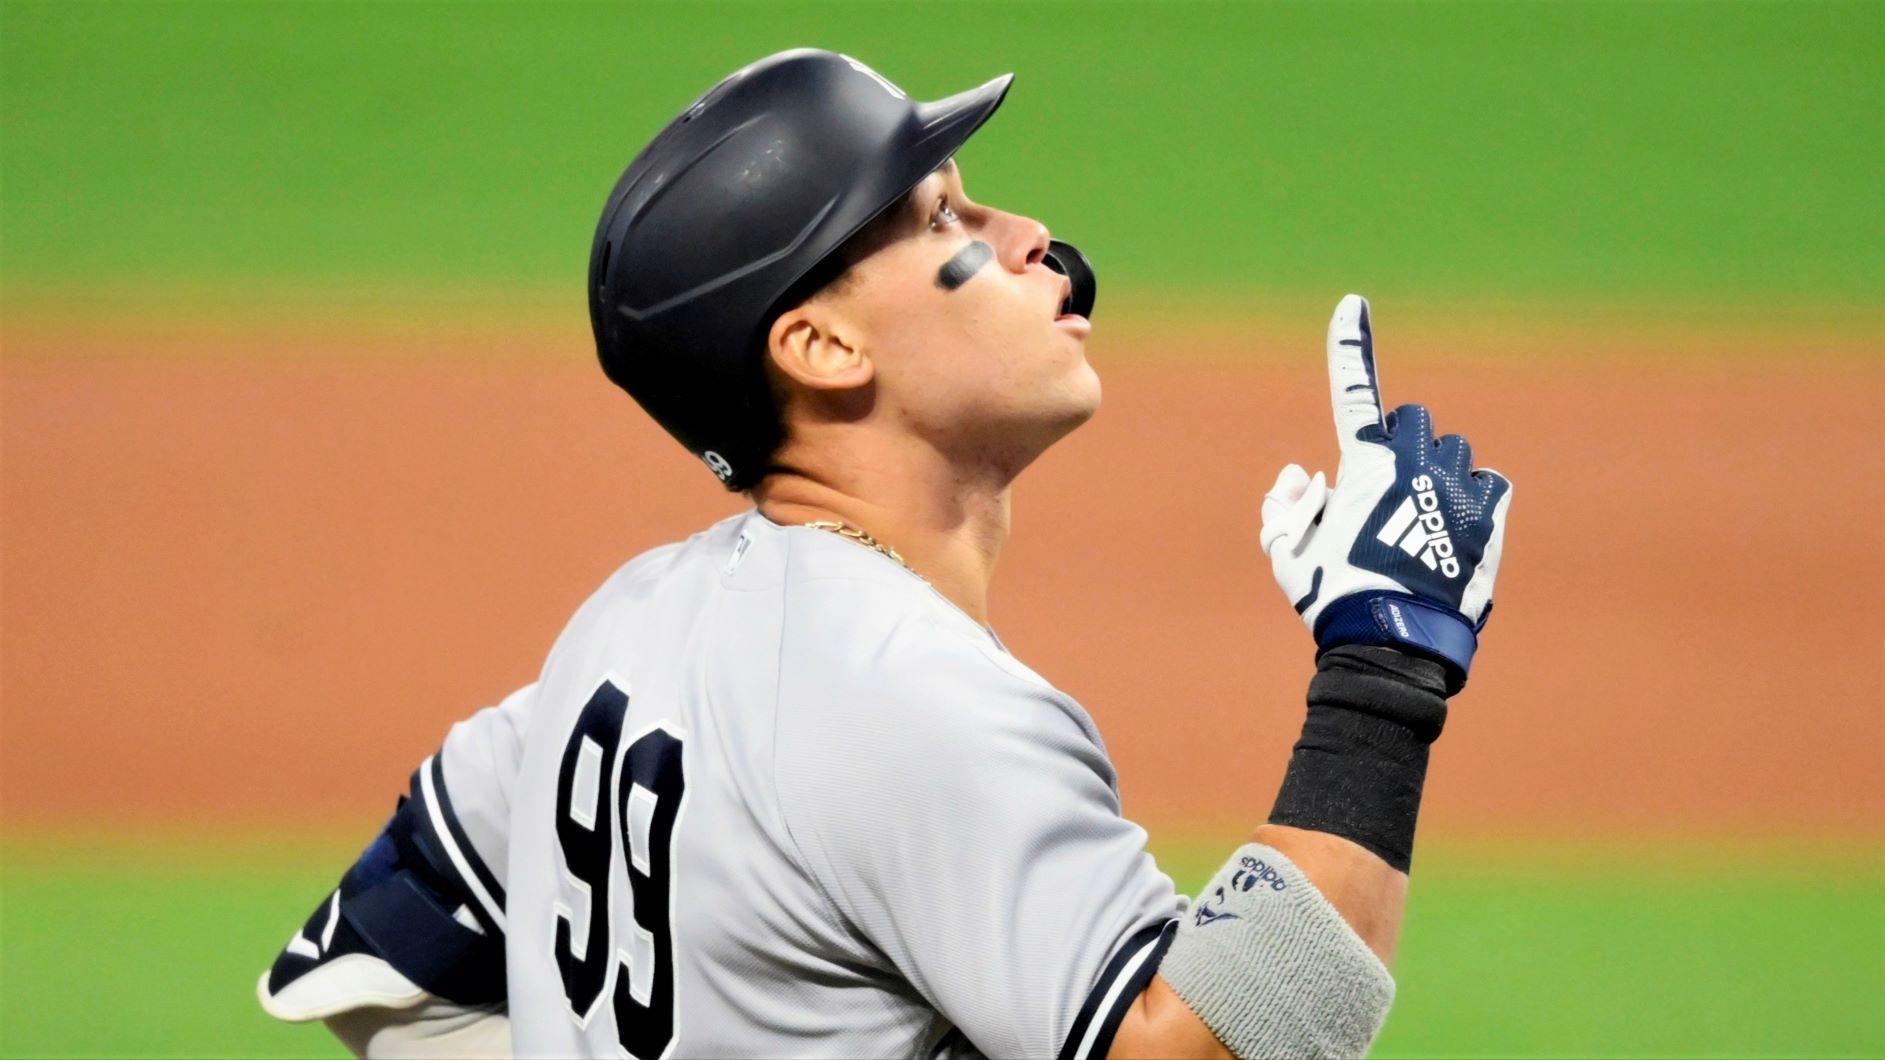 Sep 29, 2020; Cleveland, Ohio, USA; New York Yankees right fielder Aaron Judge (99) celebrates after hitting a two-run home run against the Cleveland Indians in the first inning at Progressive Field. Mandatory Credit: David Richard-USA TODAY Sports / © David Richard-USA TODAY Sports